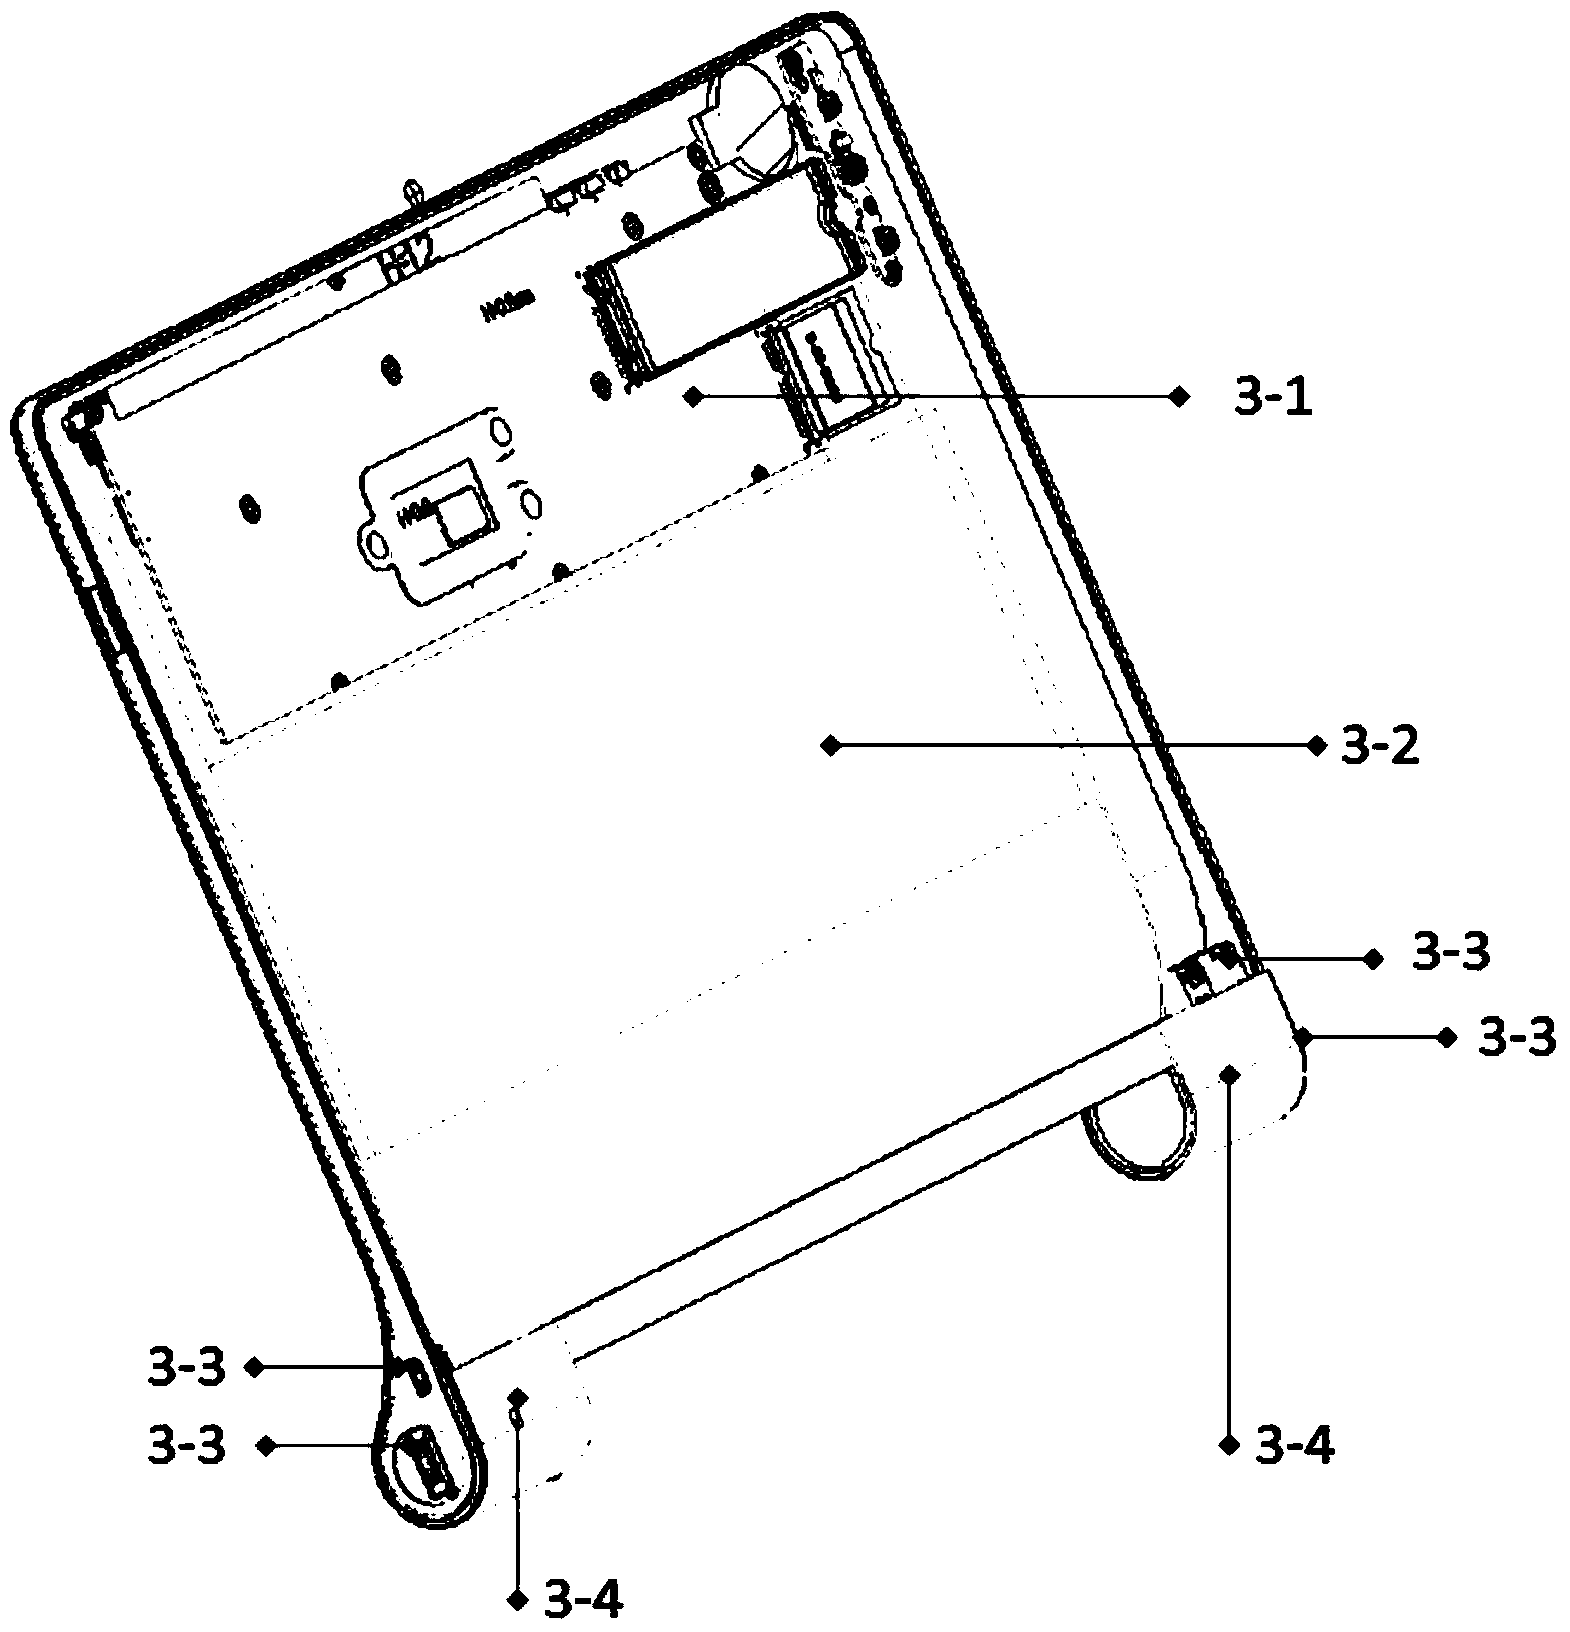 Electronic equipment capable of hiding keyboard